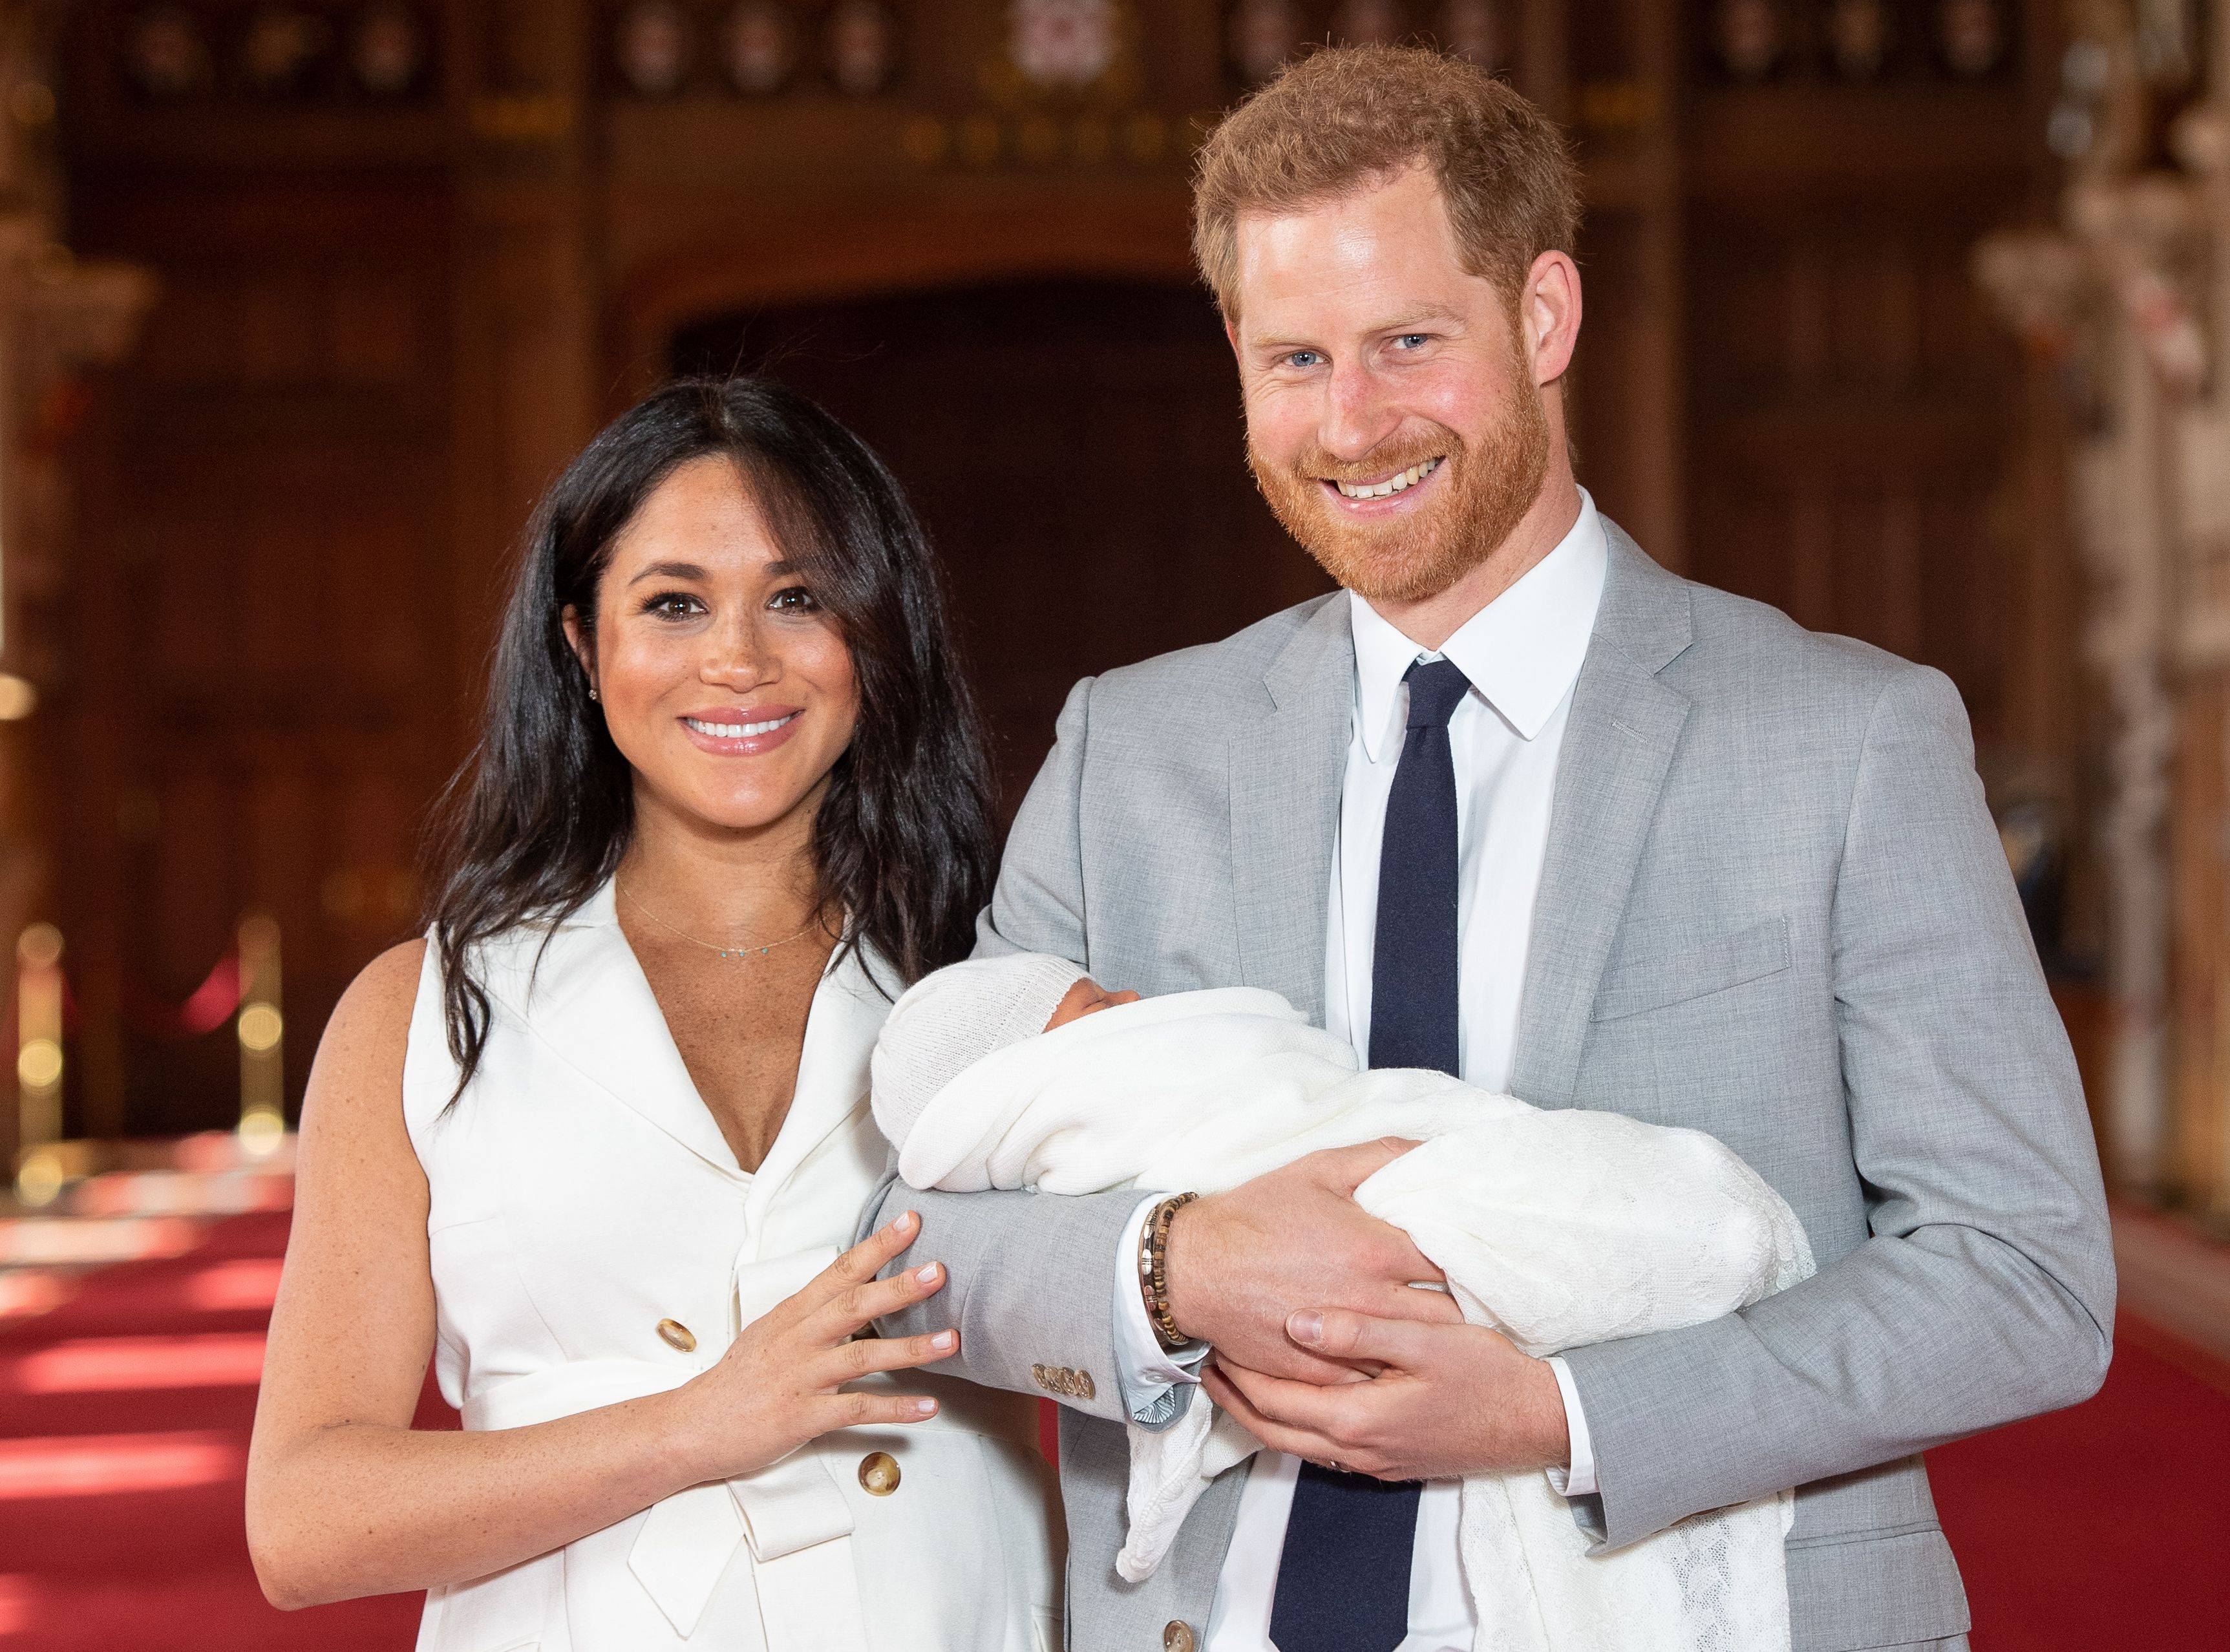 TOPSHOT - Britain's Prince Harry, Duke of Sussex (R), and his wife Meghan, Duchess of Sussex, pose for a photo with their newborn baby son, Archie Harrison Mountbatten-Windsor, in St George's Hall at Windsor Castle in Windsor, west of London on May 8, 2019. (Photo by Dominic Lipinski / POOL / AFP)        (Photo credit should read DOMINIC LIPINSKI/AFP via Getty Images)